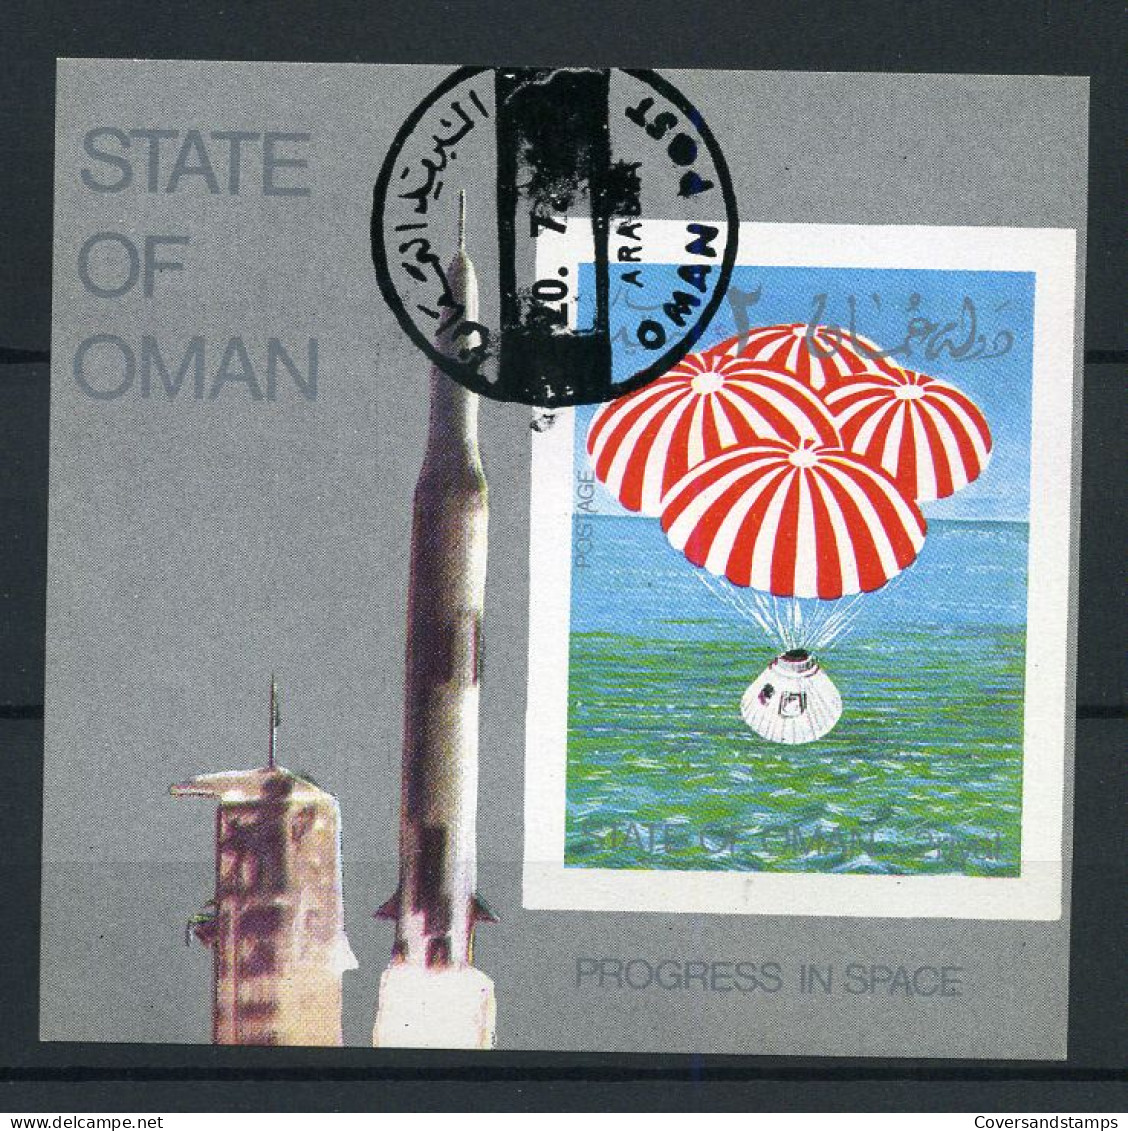 State Of Oman - Progress In Space - Block  - Gest / Obl / Used - Asia